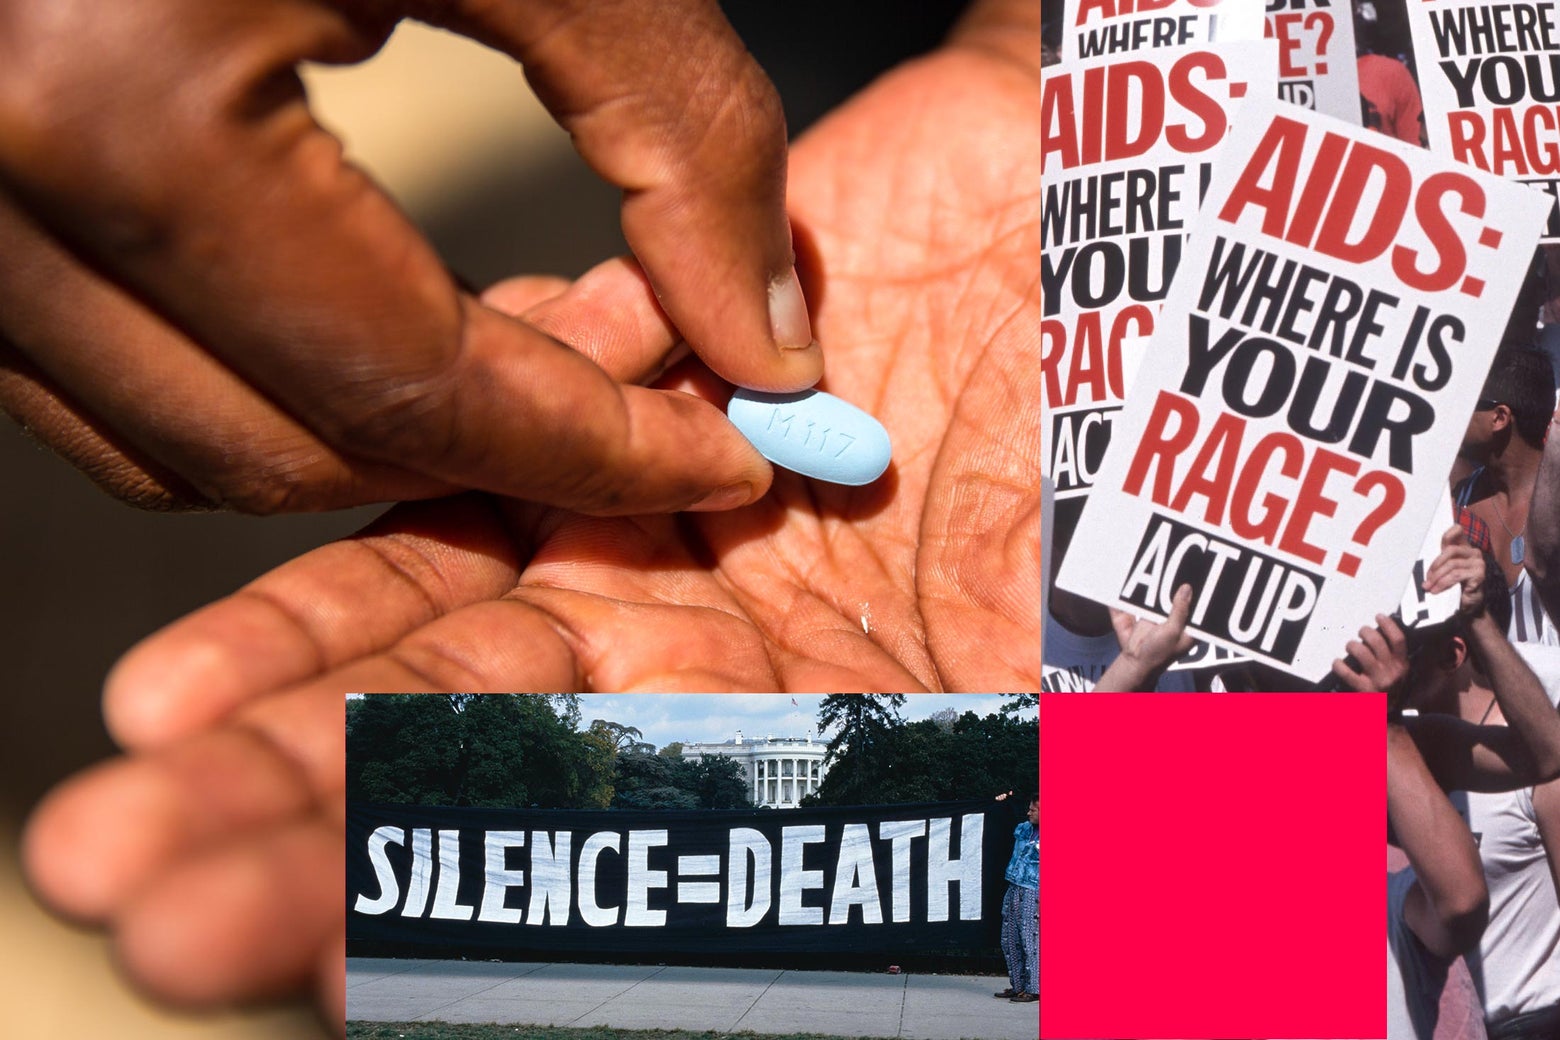 Aids Activism After End Of Hiv Transmission Should Be About Sexual Justice 5366